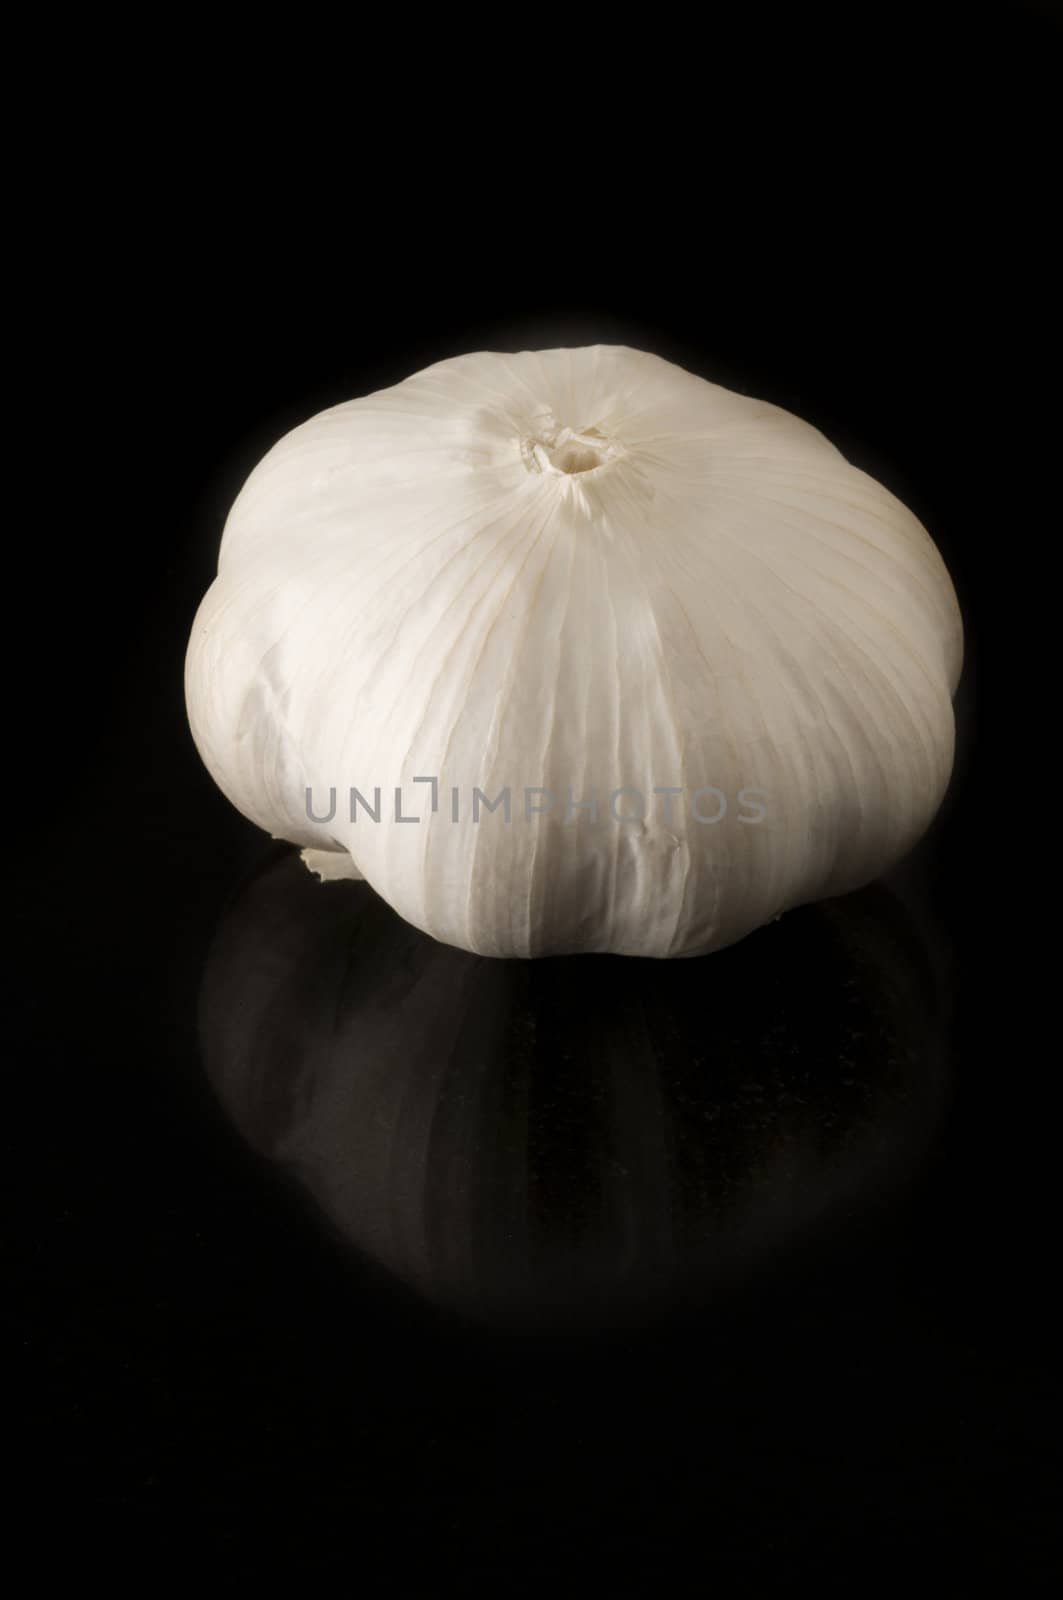 Garlic clove on black background with slight reflection on the tile